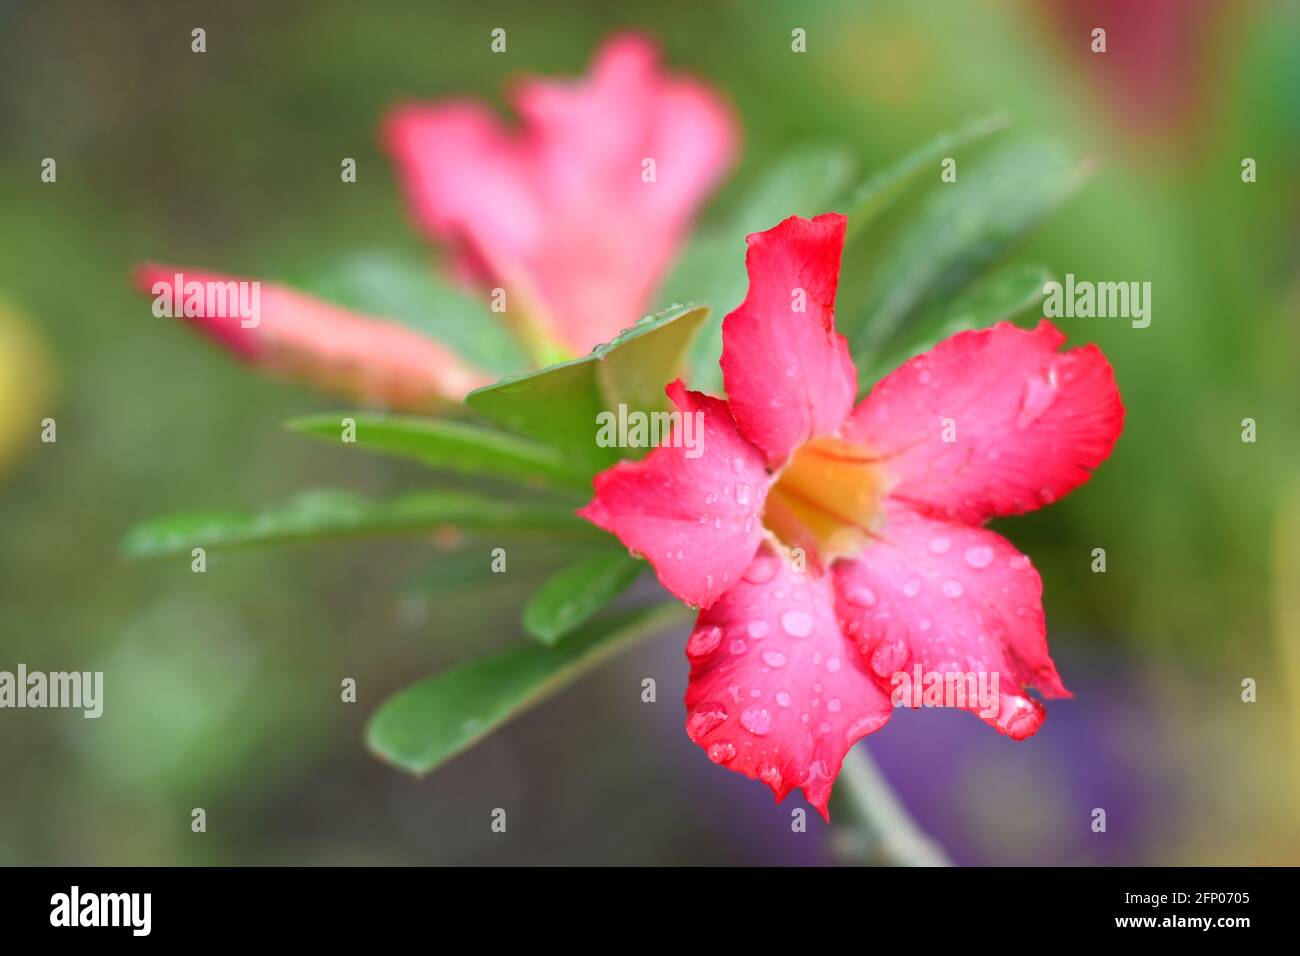 A close up photo of Desert rose (Adenium obesum) covered by raindrops Stock Photo